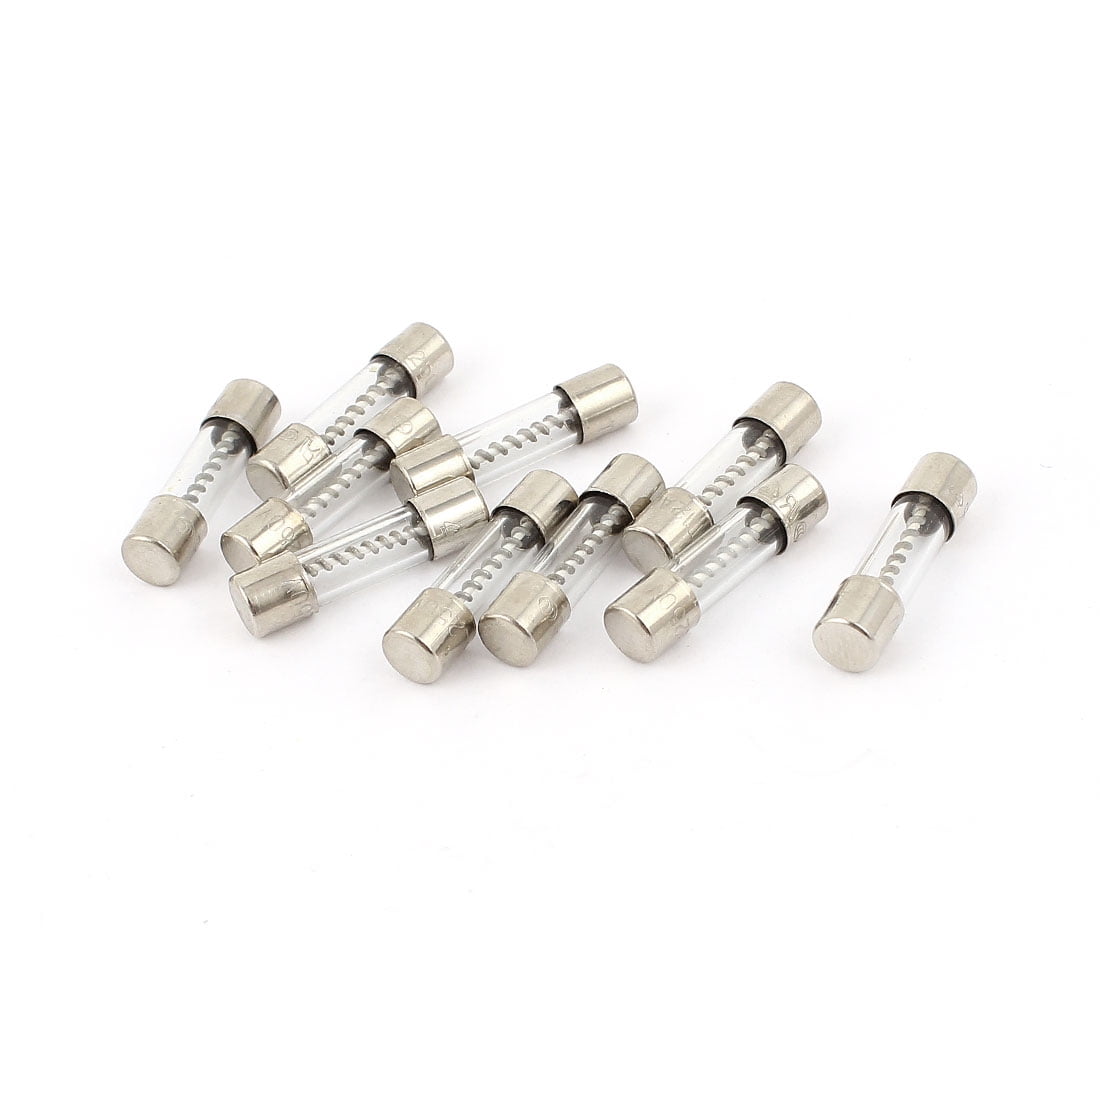 0.75A 250VAC Glass Fuse 5x20mm Slow Blow Pack of 10 